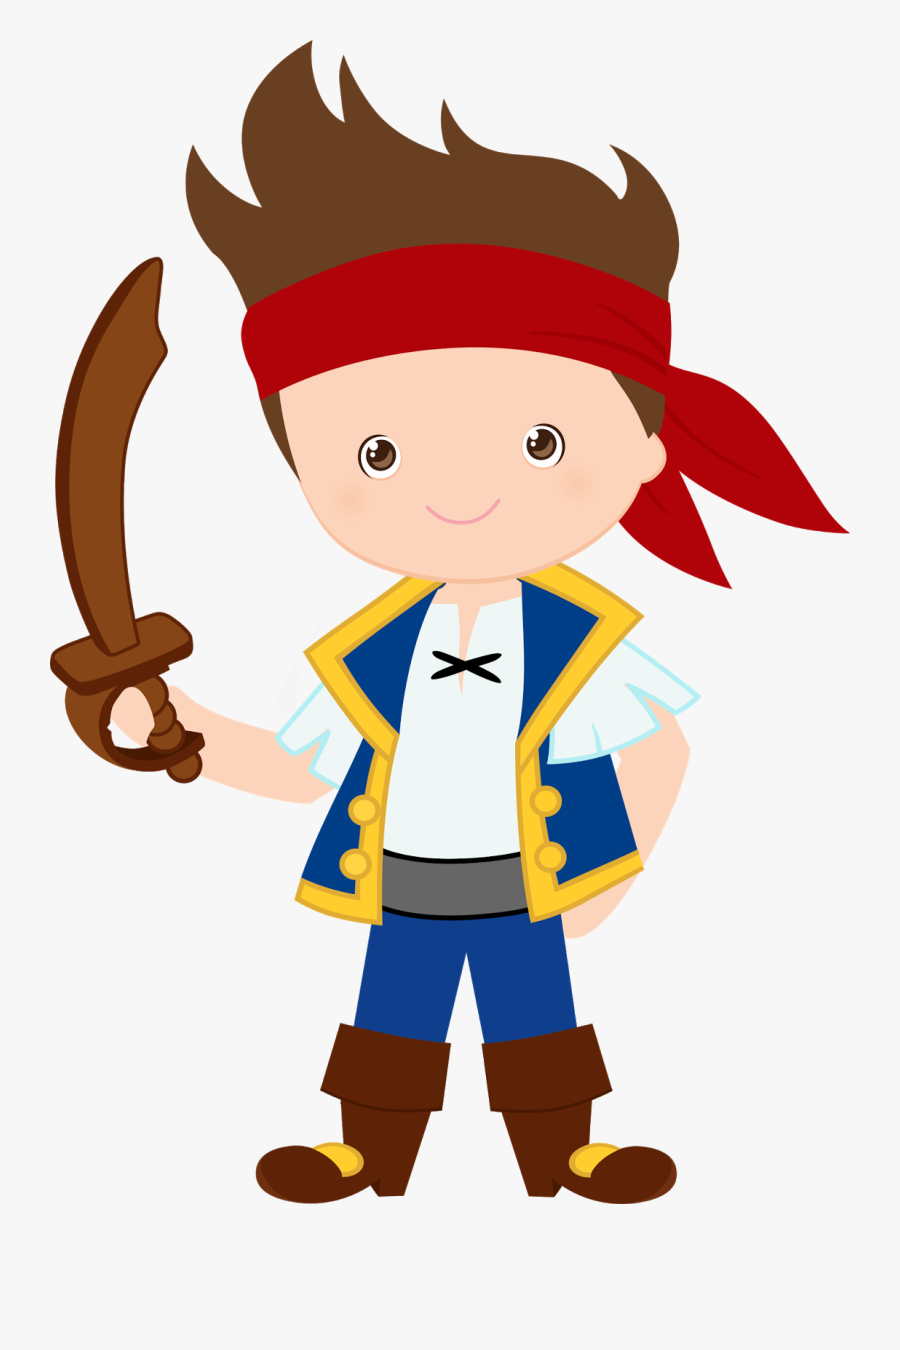 Jake And The Neverland Pirates Clipart - Jake And The Neverland Pirates Transparent Background, Transparent Clipart